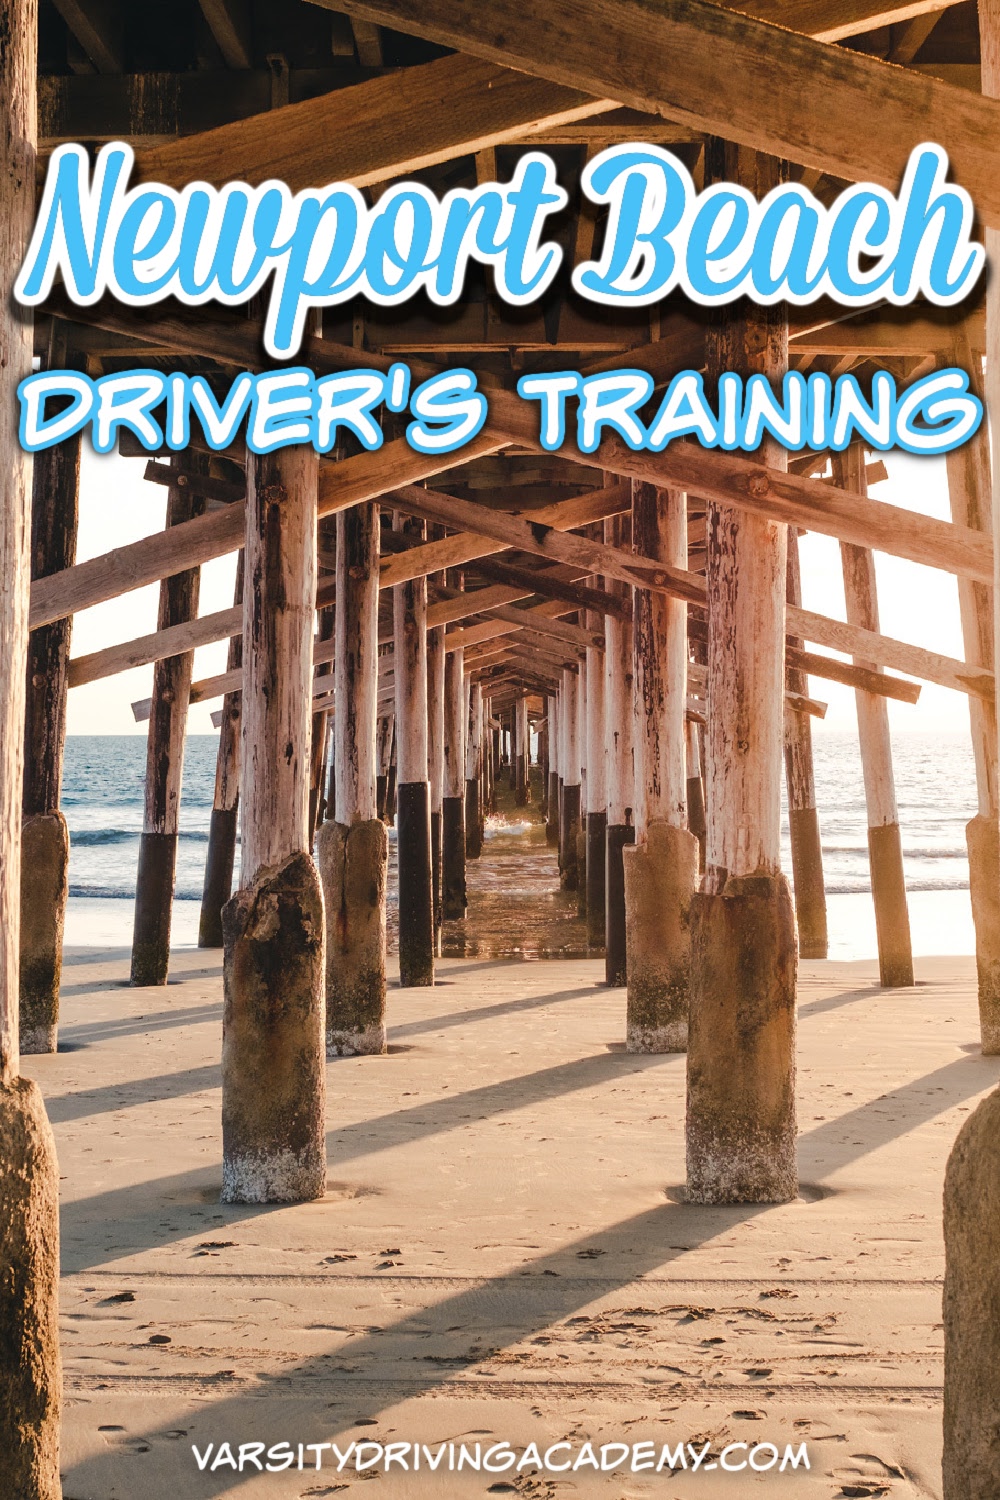 Welcome to Varsity Driving Academy, your #1 rated Newport Beach Driving School.